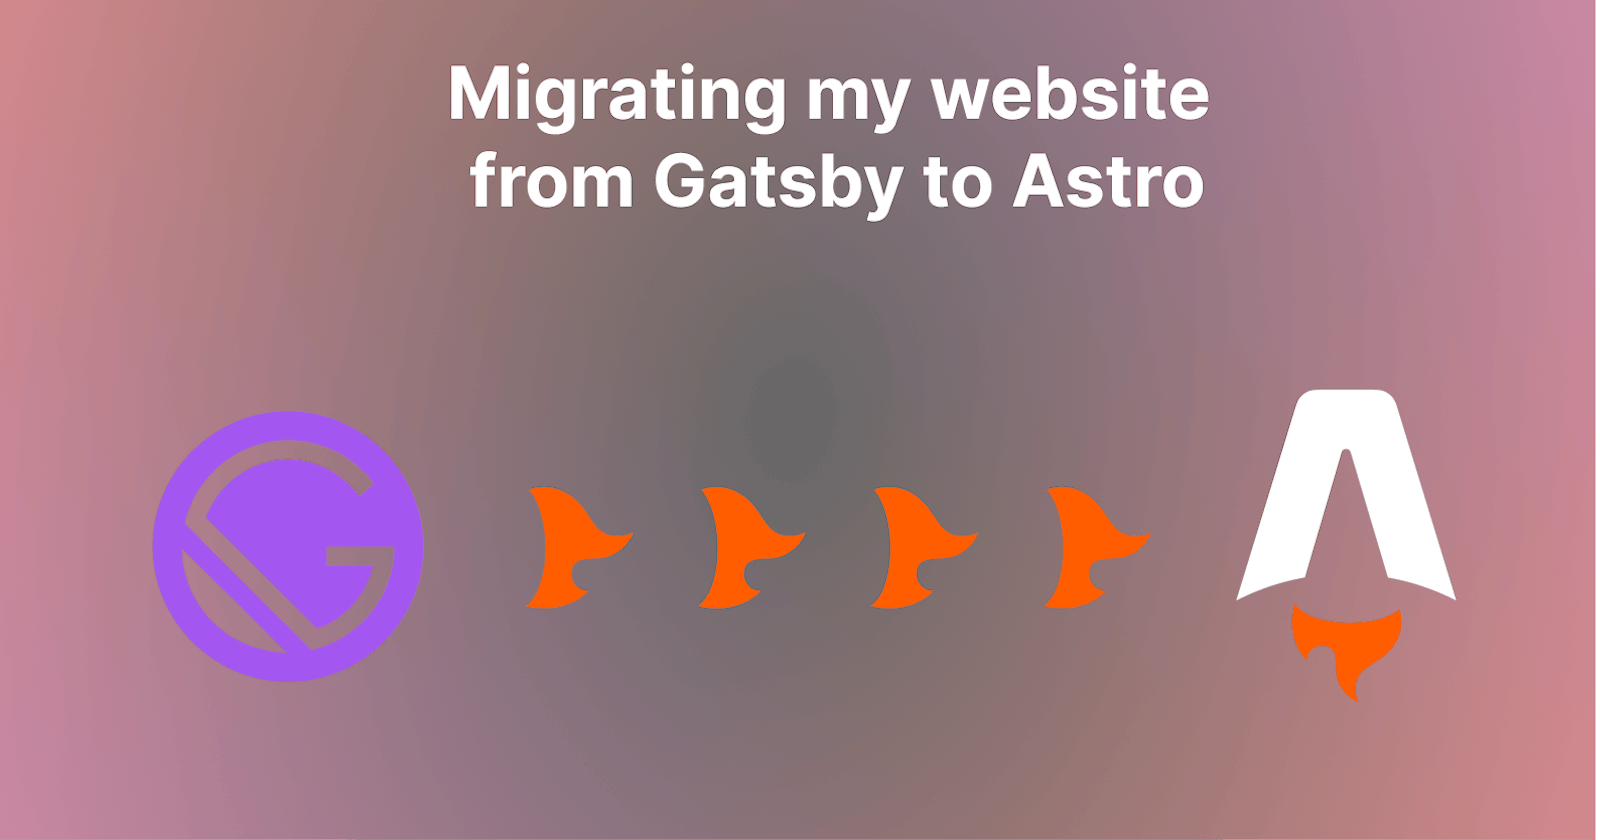 Migrating my website from Gatsby to Astro